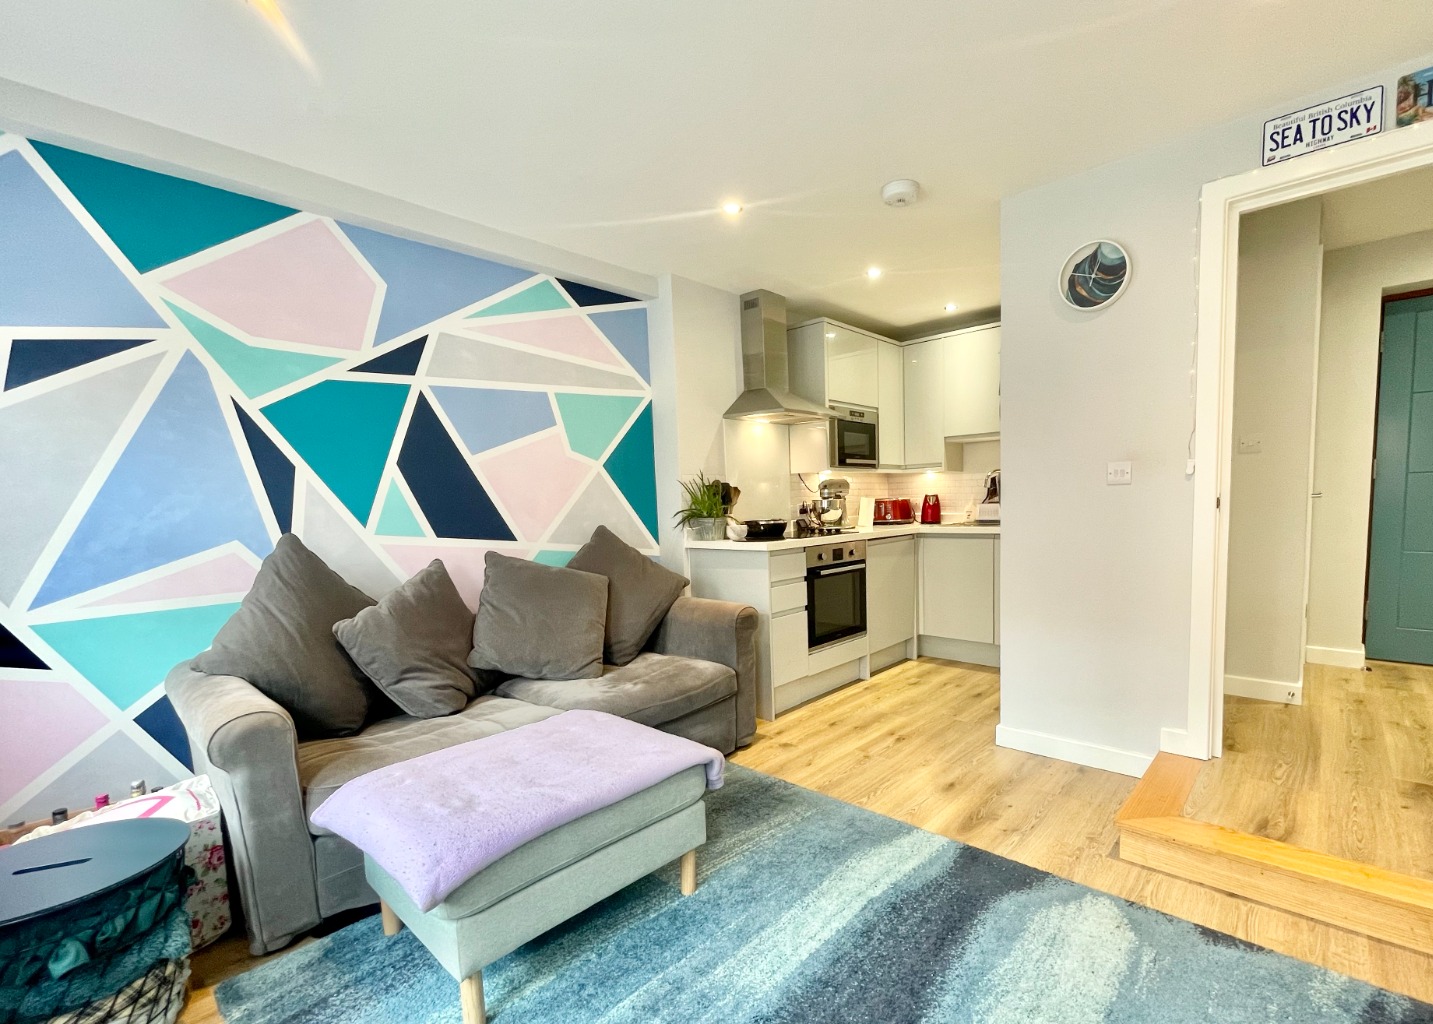 1 bed flat for sale  - Property Image 1